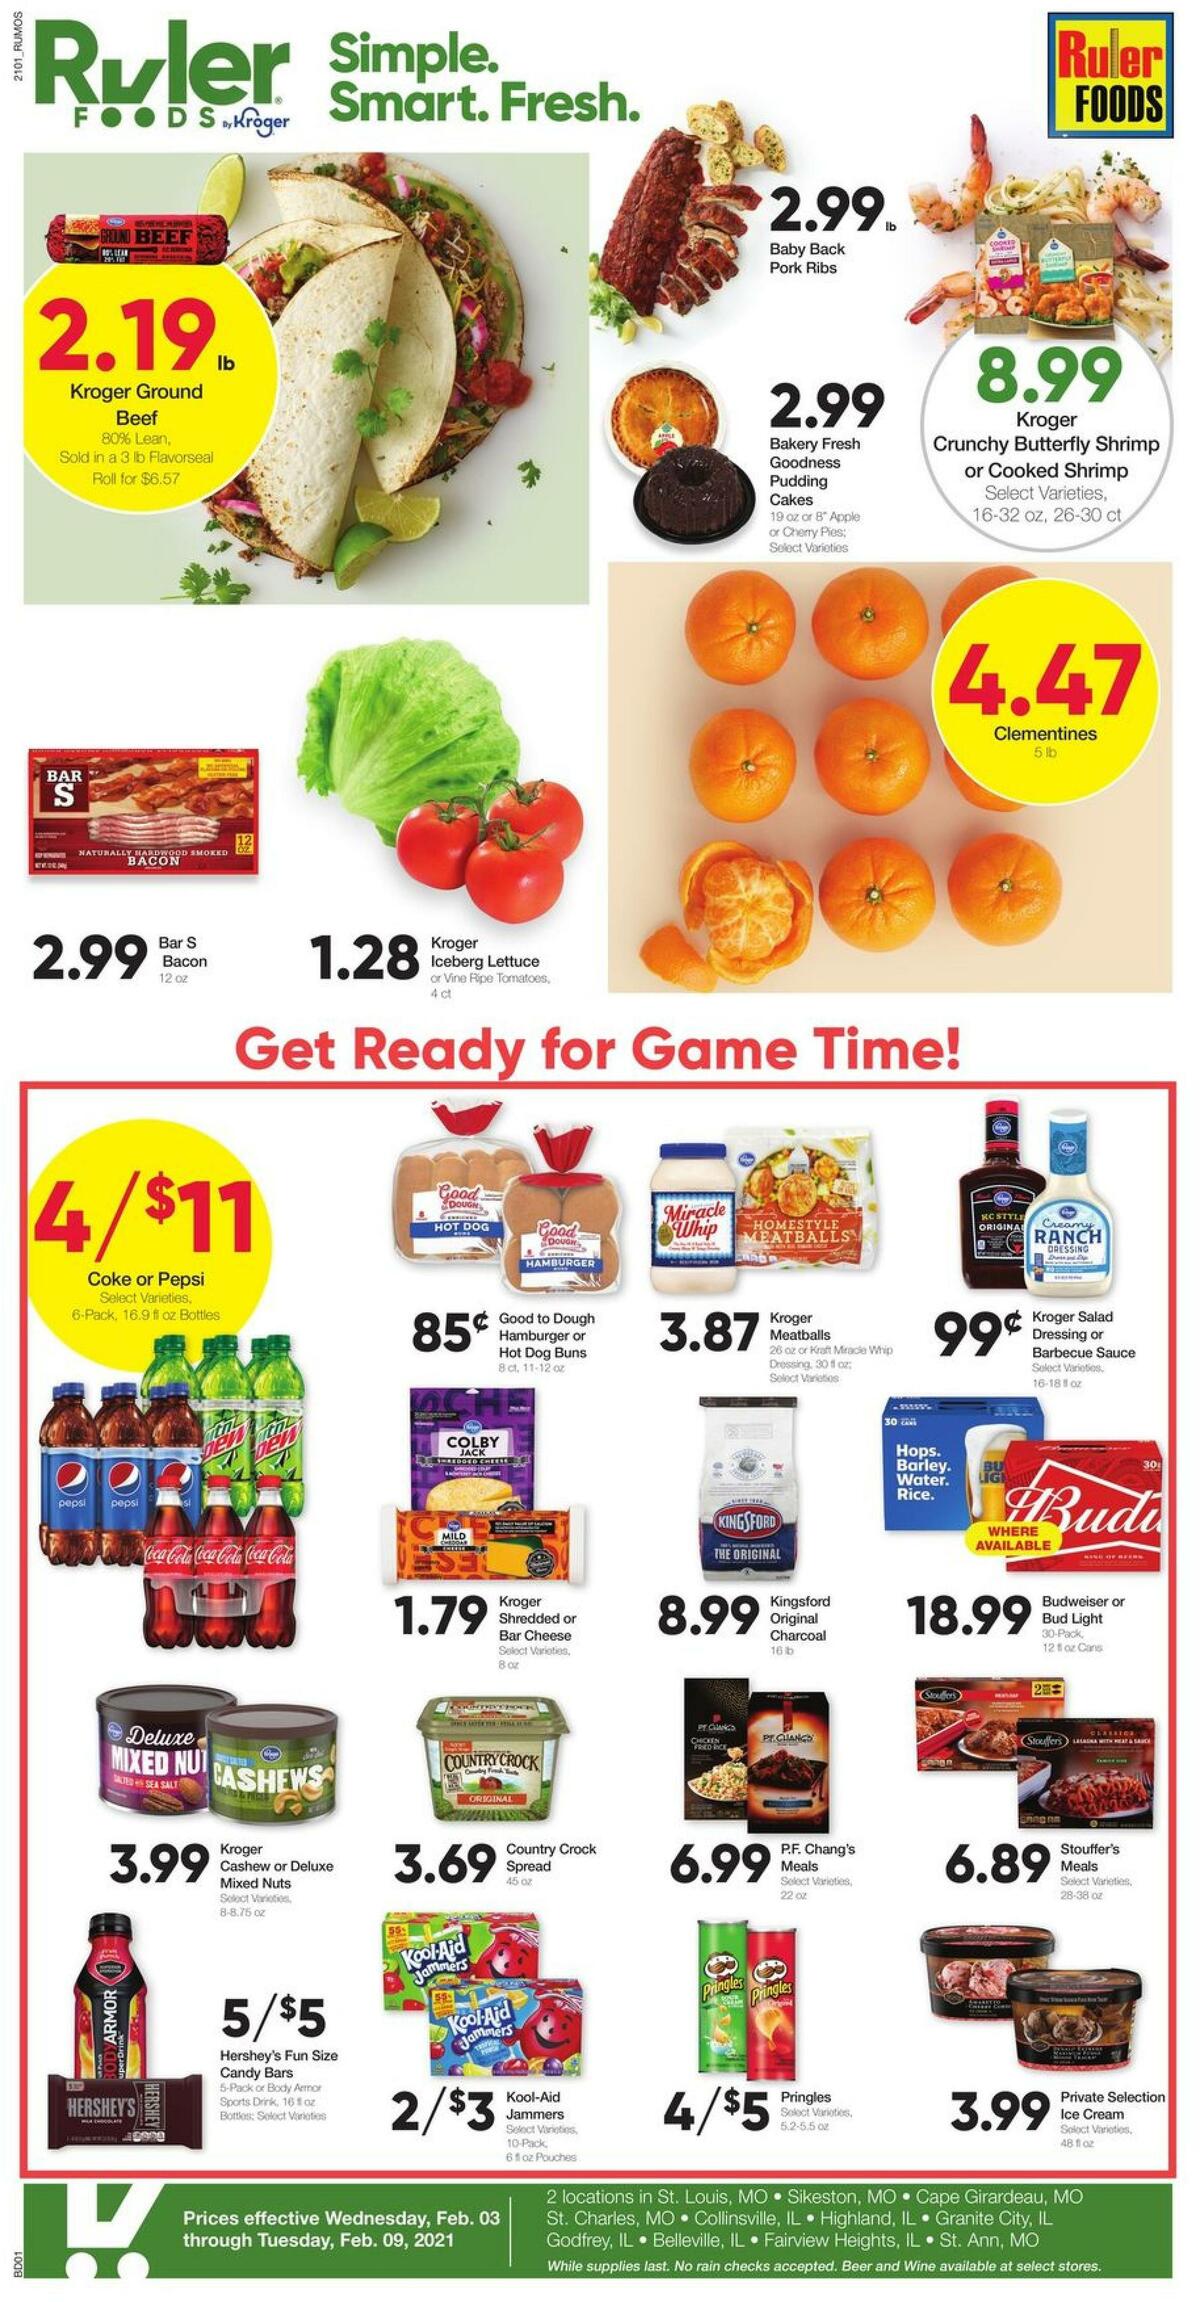 Ruler Foods Weekly Ad from February 3